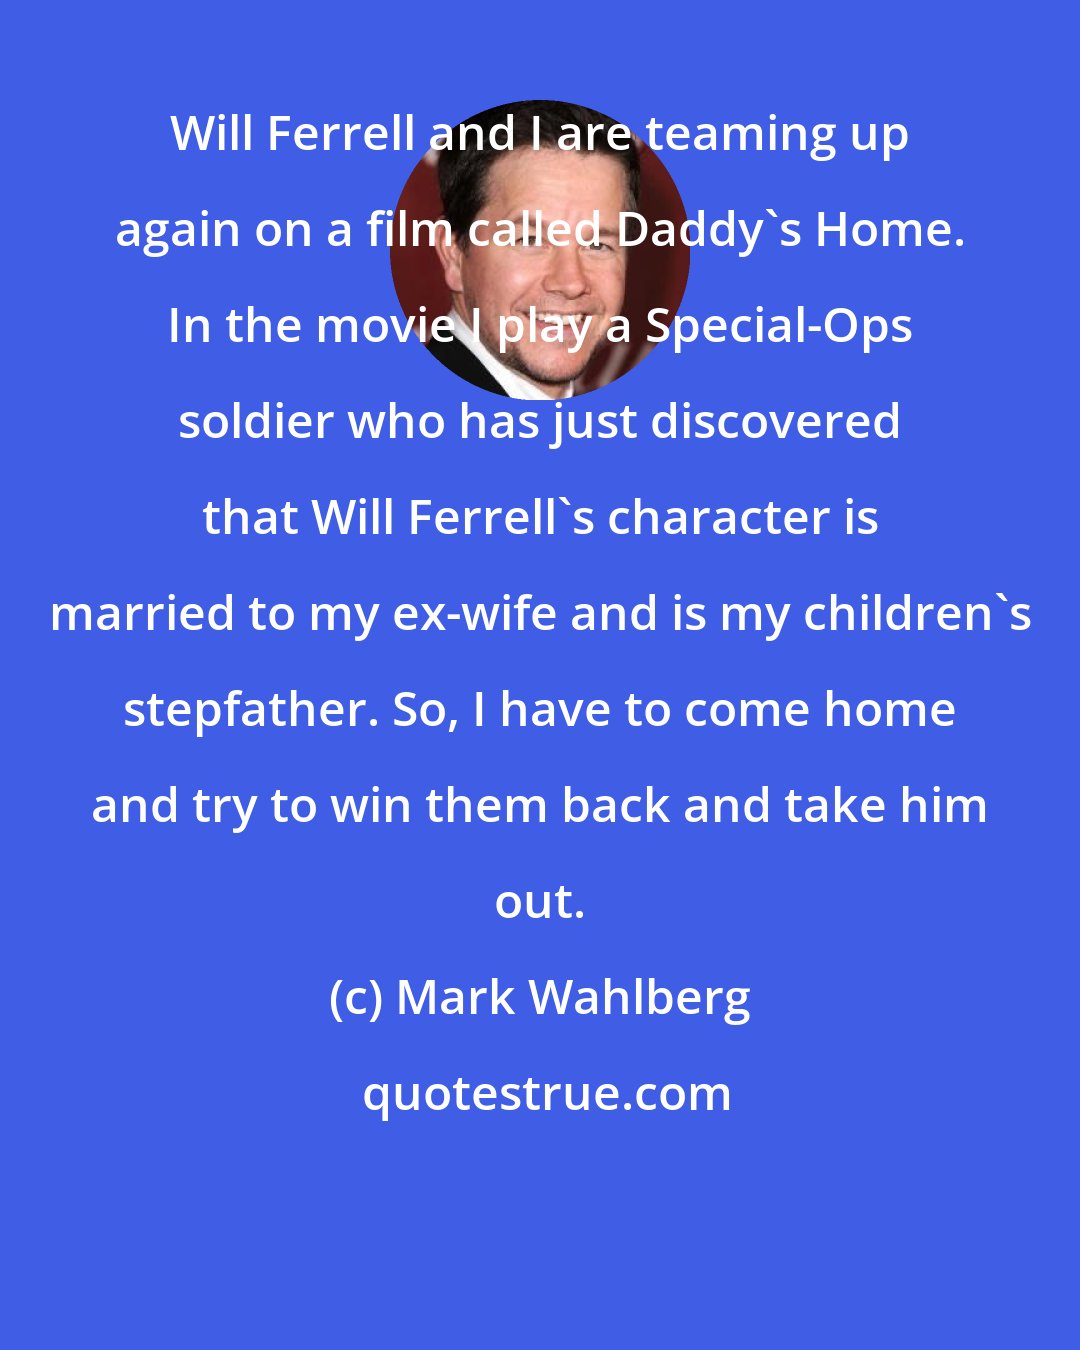 Mark Wahlberg: Will Ferrell and I are teaming up again on a film called Daddy's Home. In the movie I play a Special-Ops soldier who has just discovered that Will Ferrell's character is married to my ex-wife and is my children's stepfather. So, I have to come home and try to win them back and take him out.